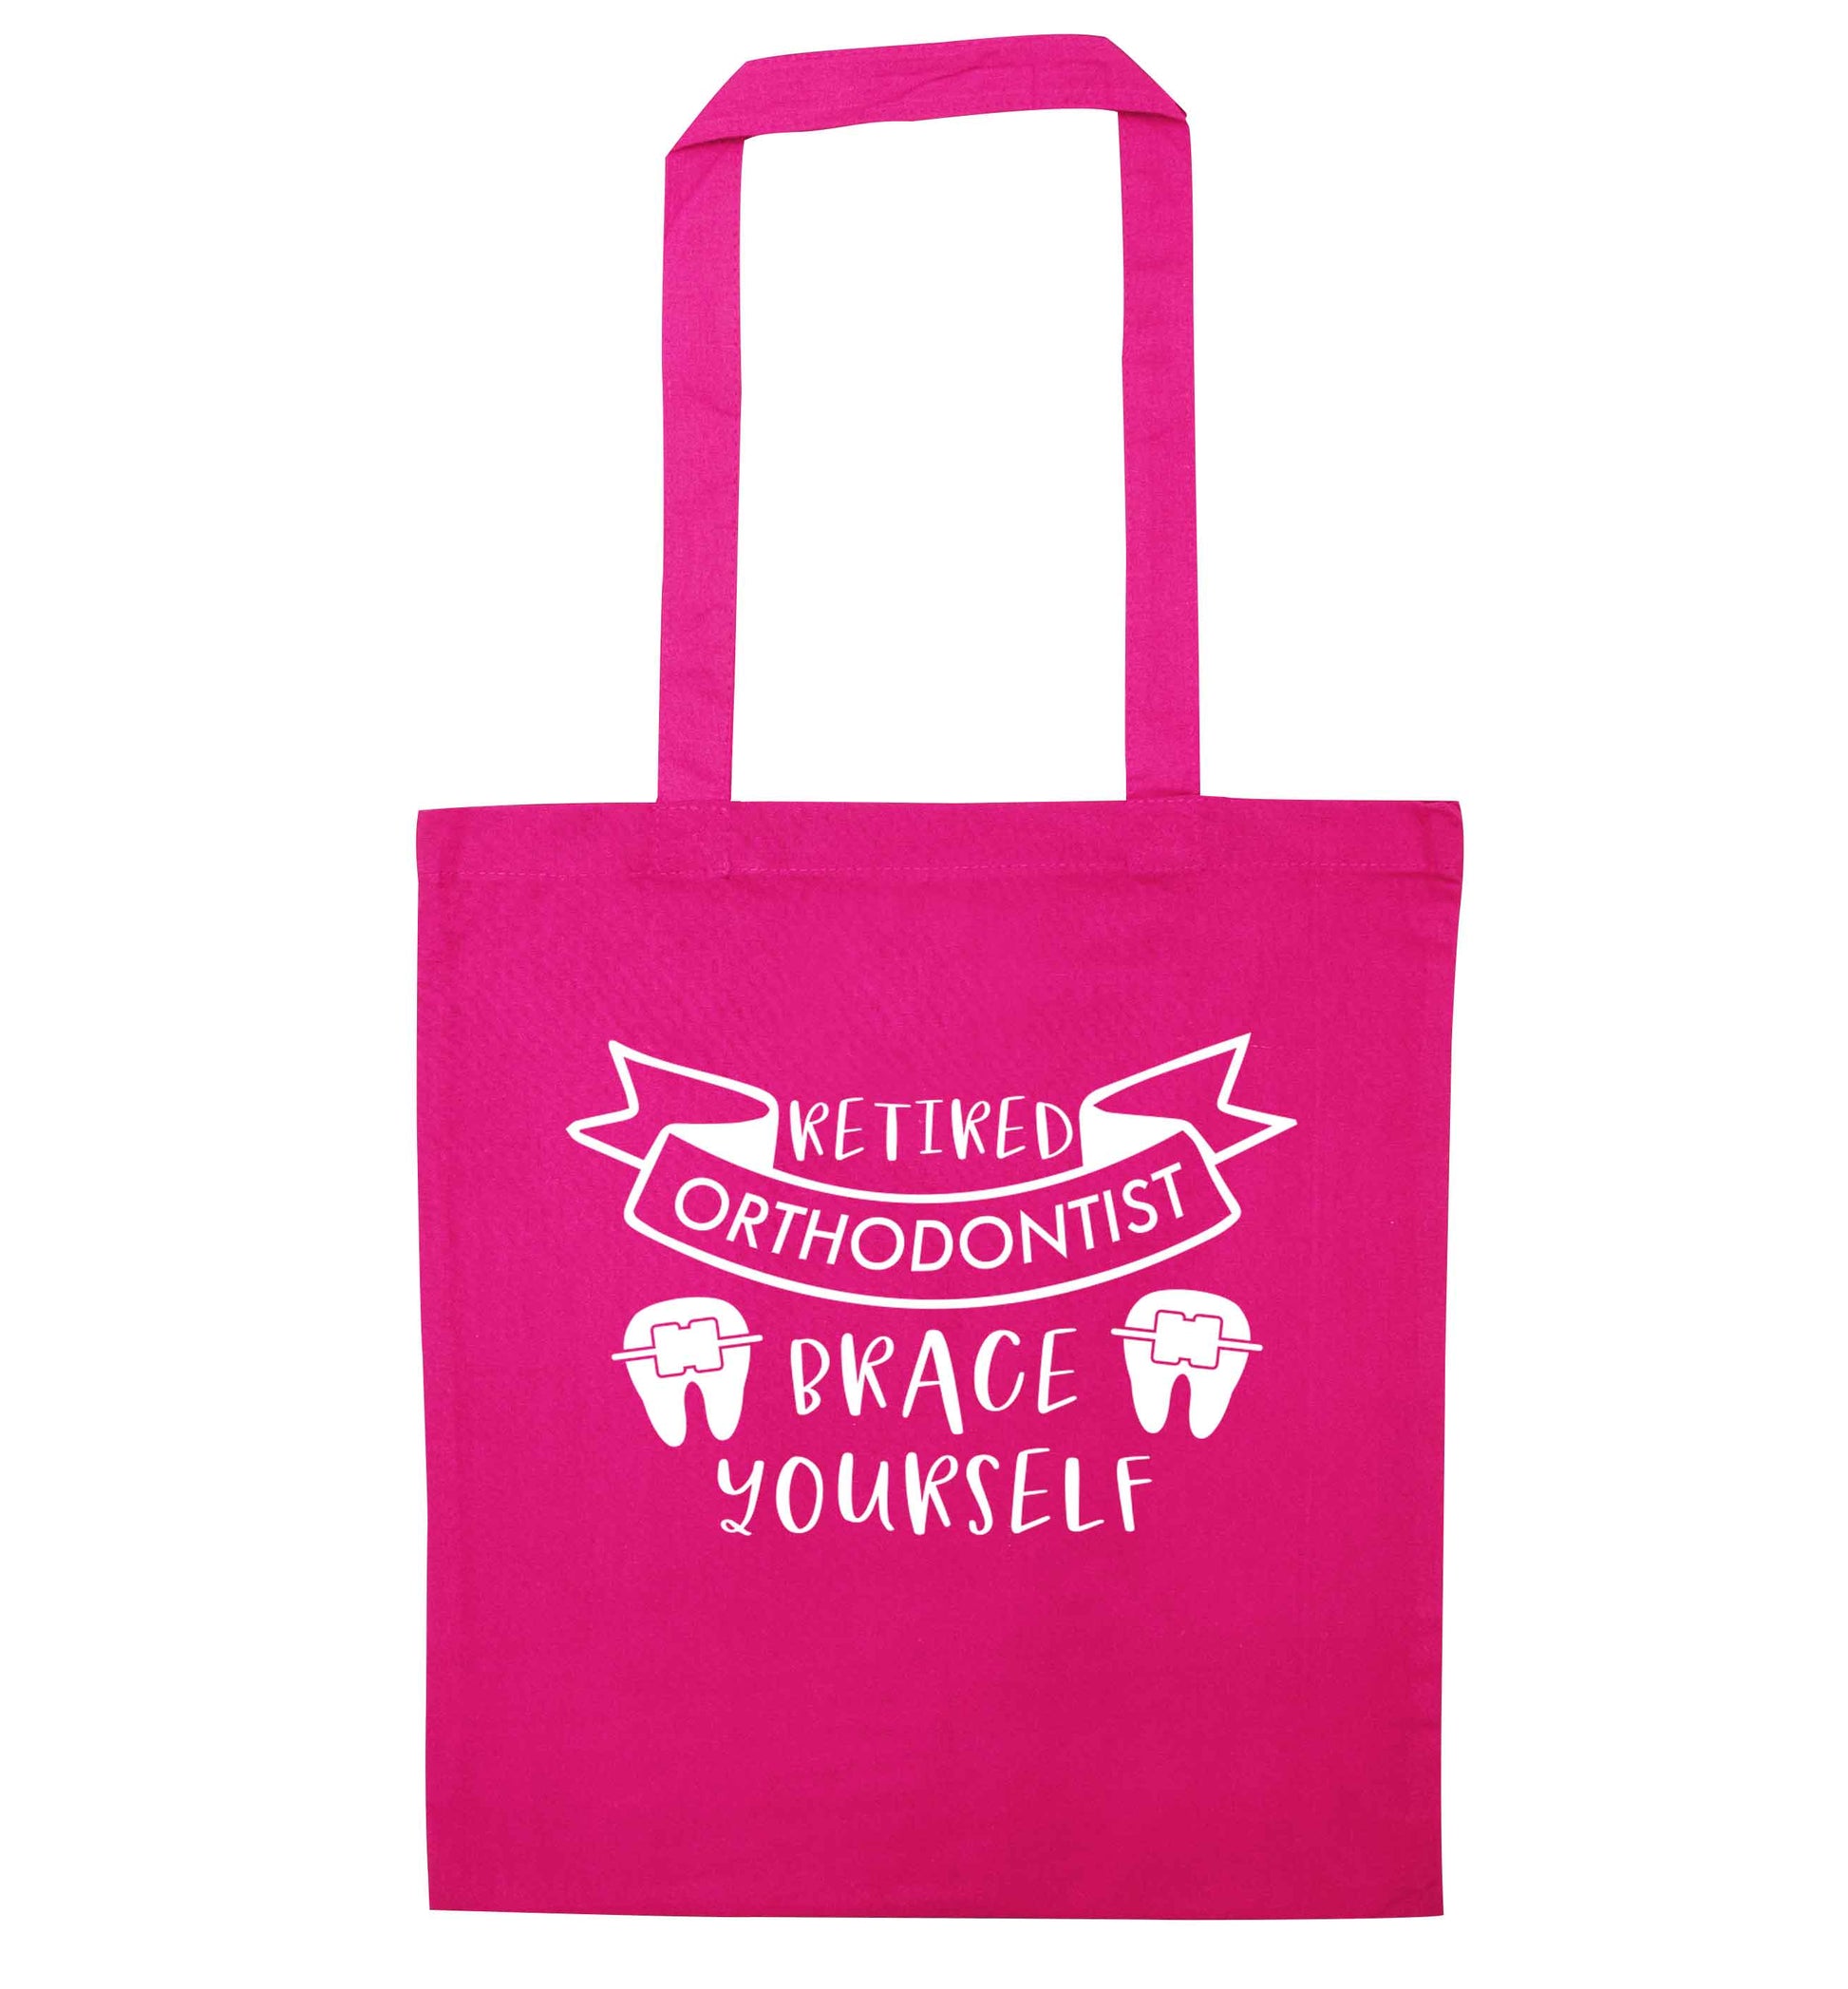 Retired orthodontist brace yourself pink tote bag